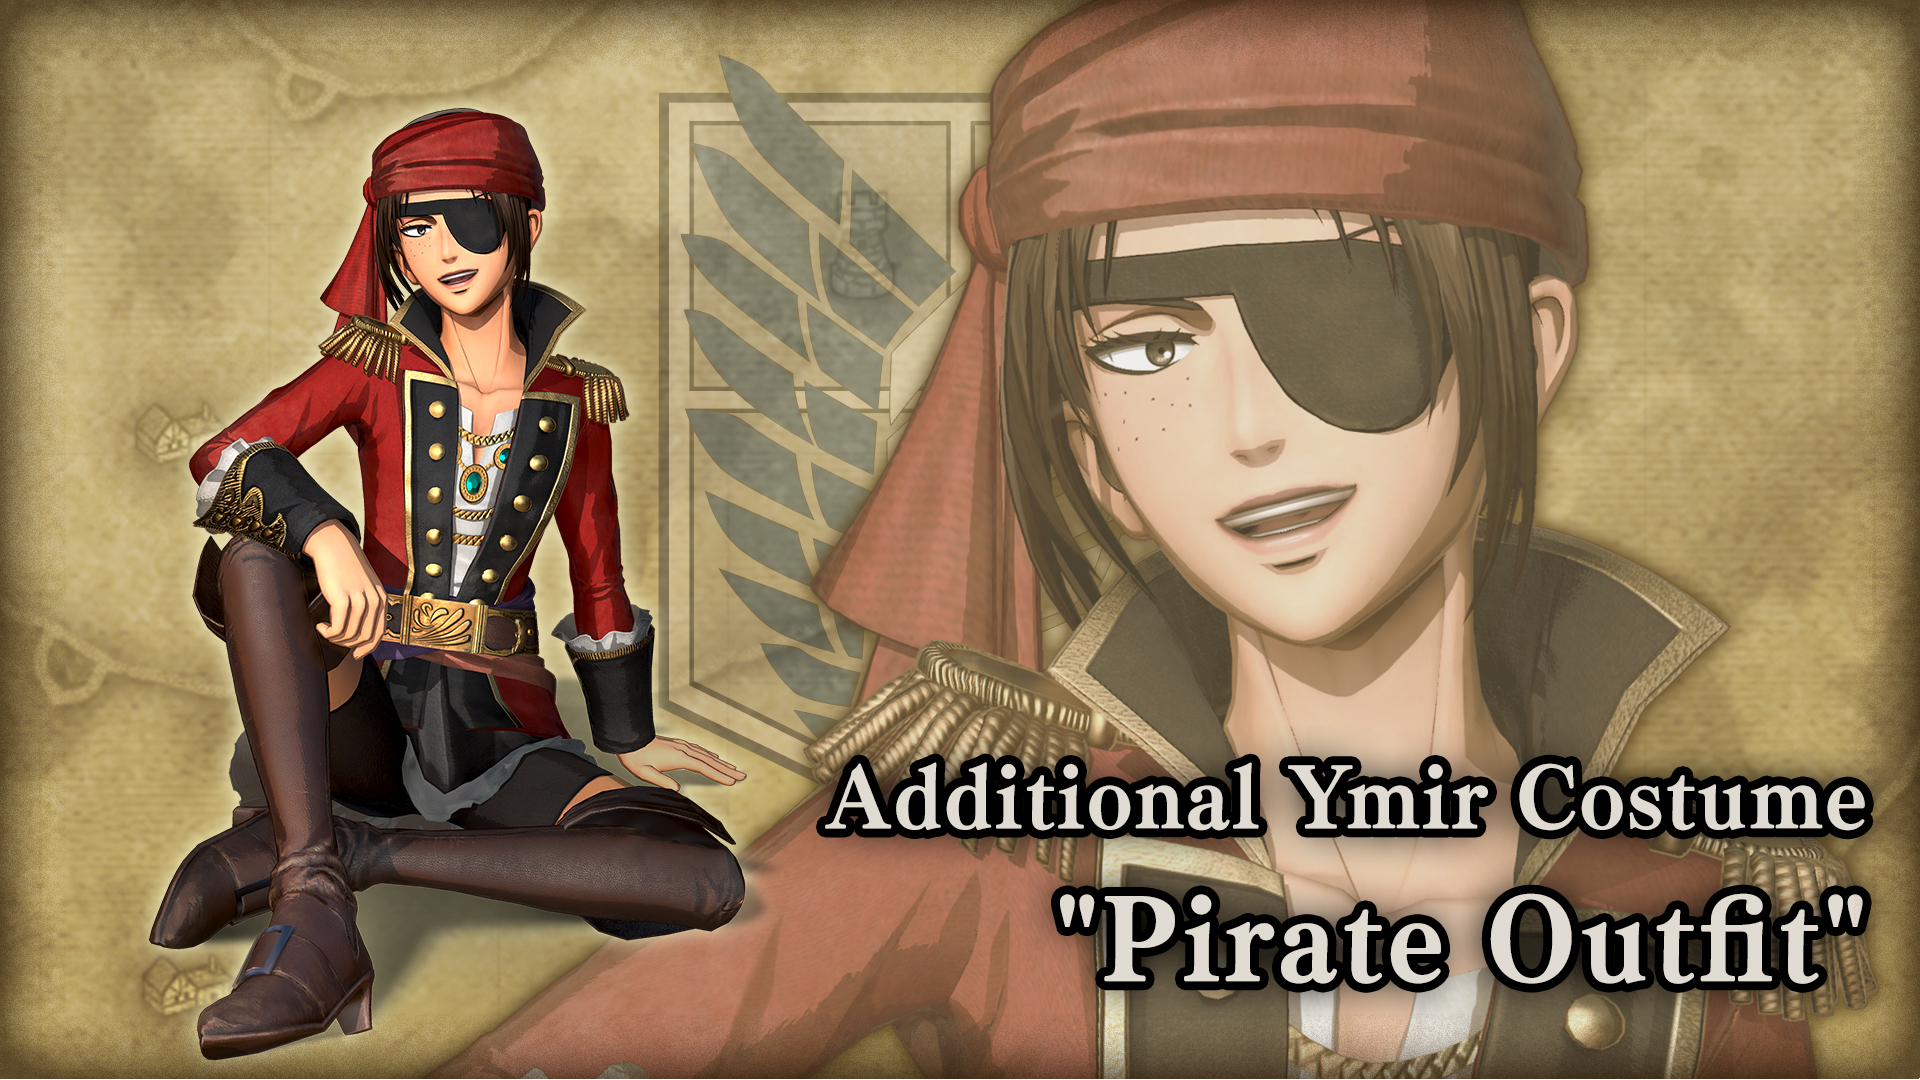 Additional Ymir Costume: "Pirate Outfit"